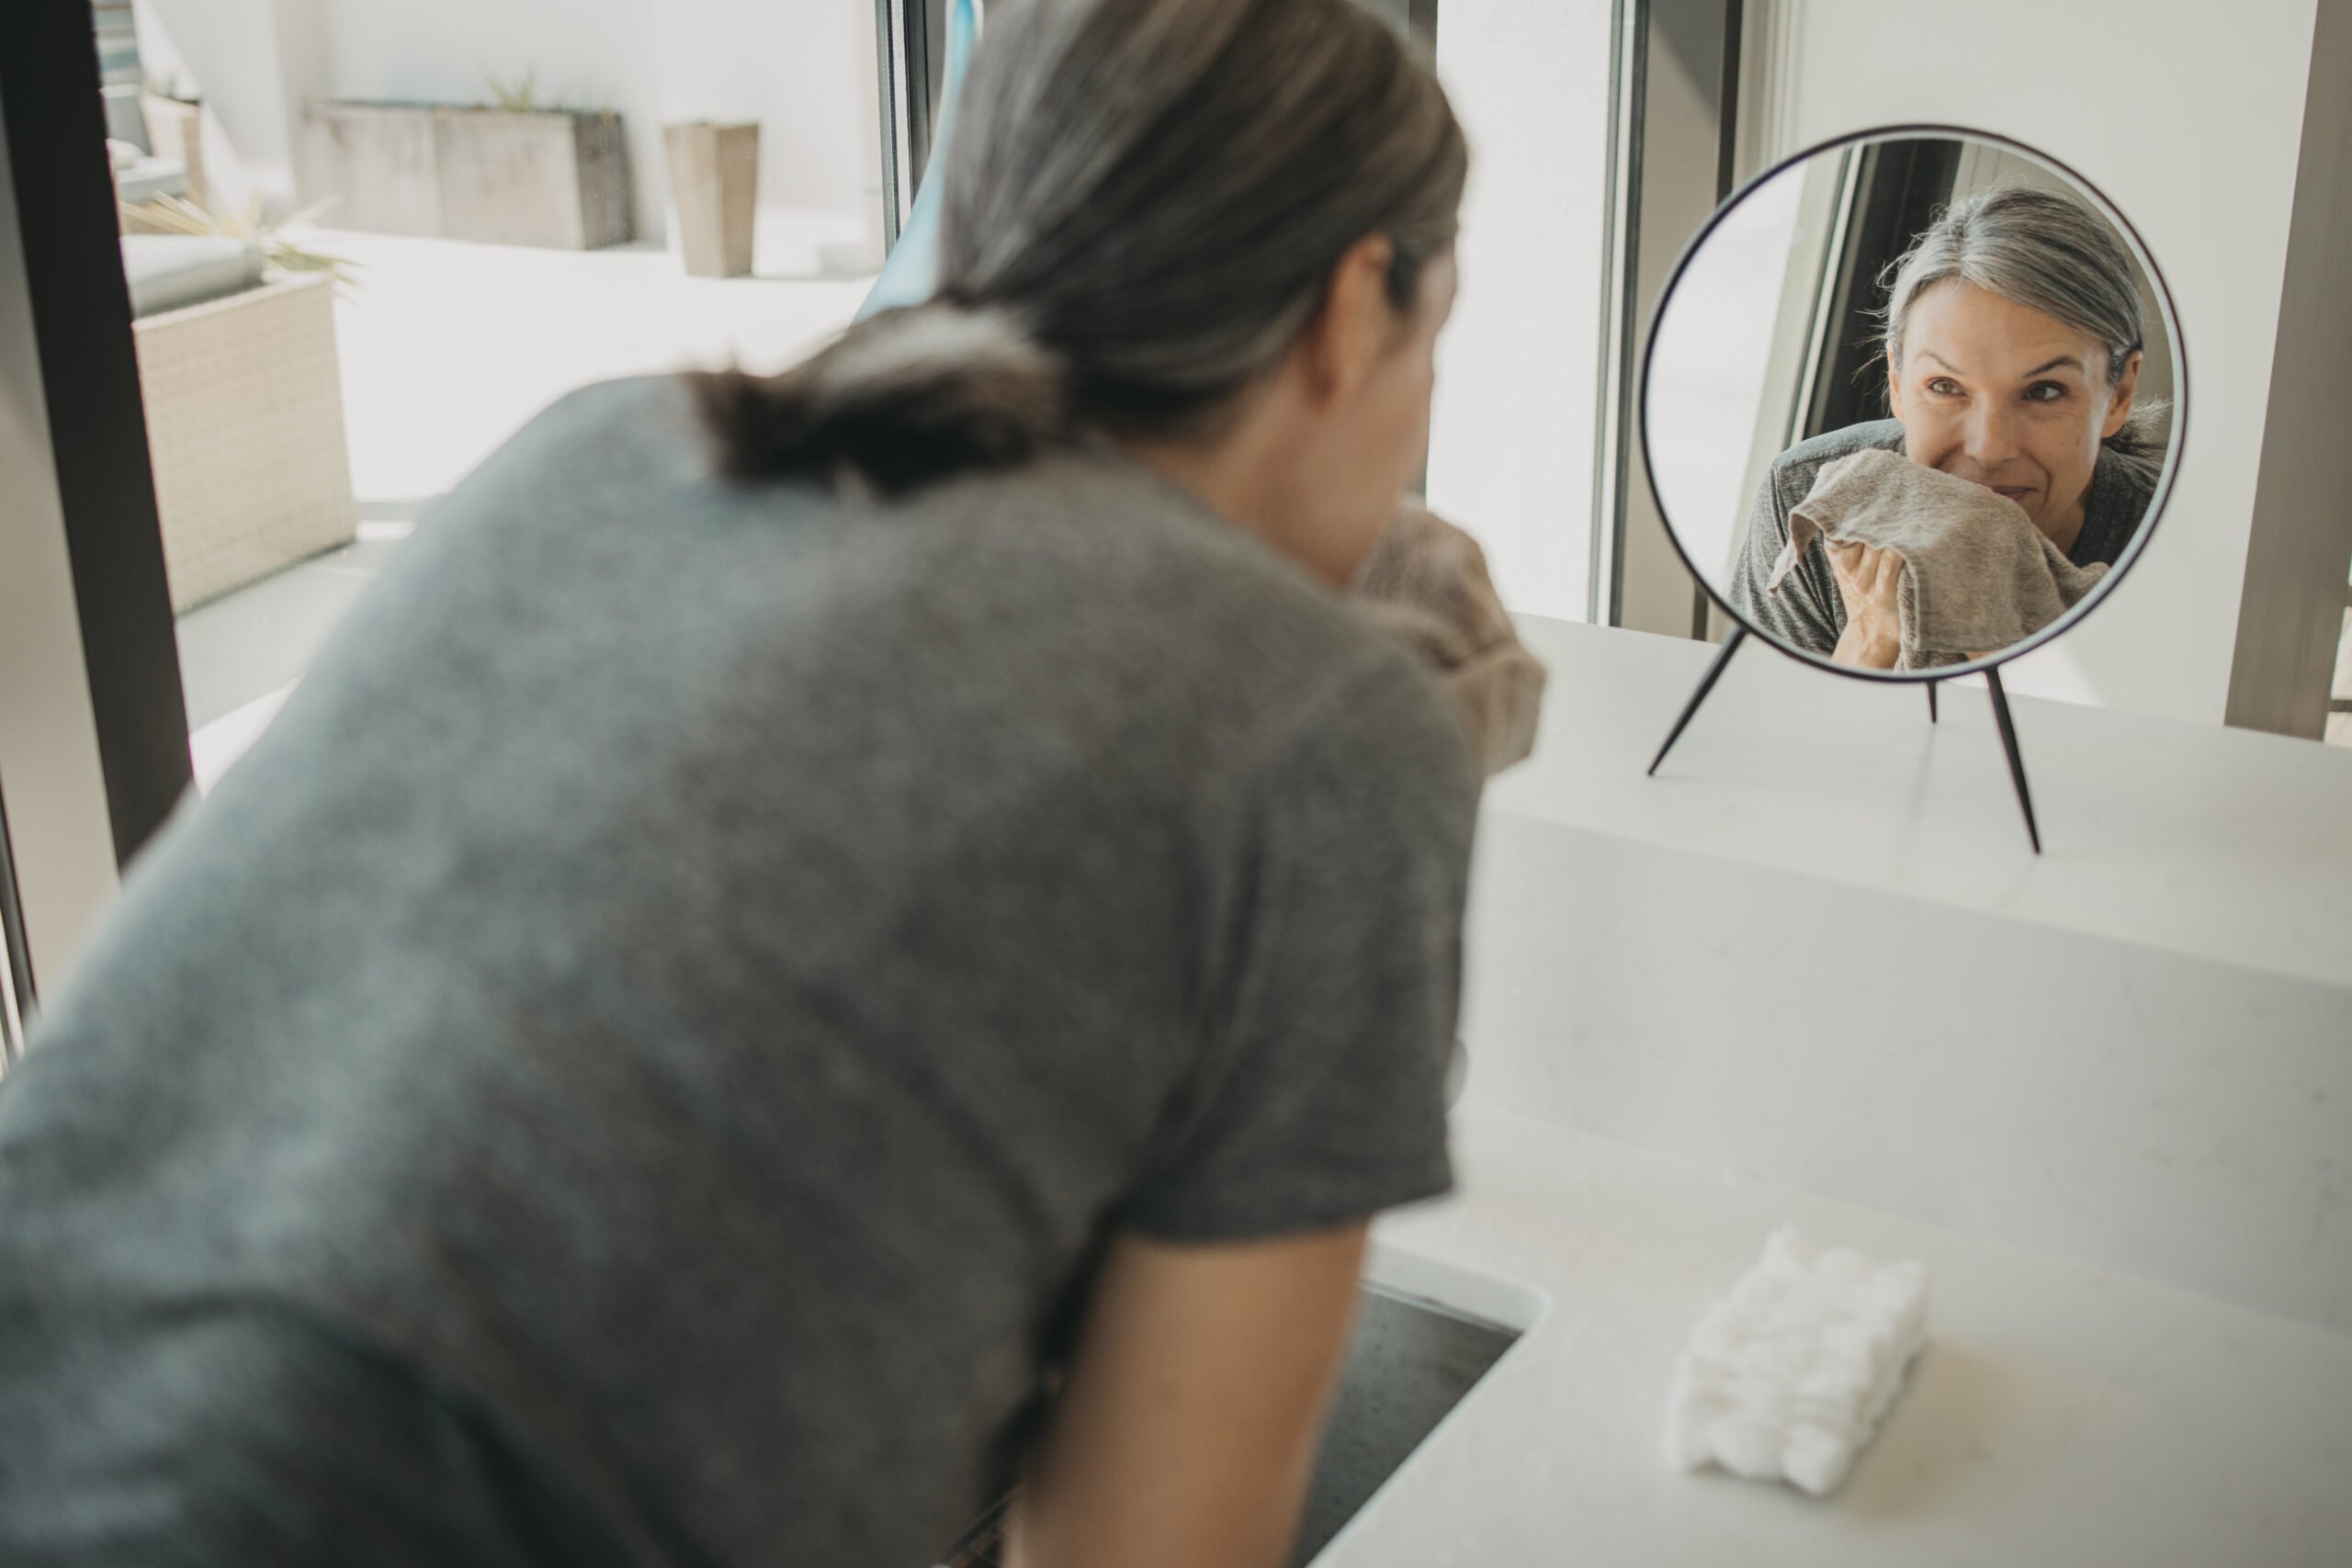 A woman dries her face with a towel while looking into a tabletop mirror.